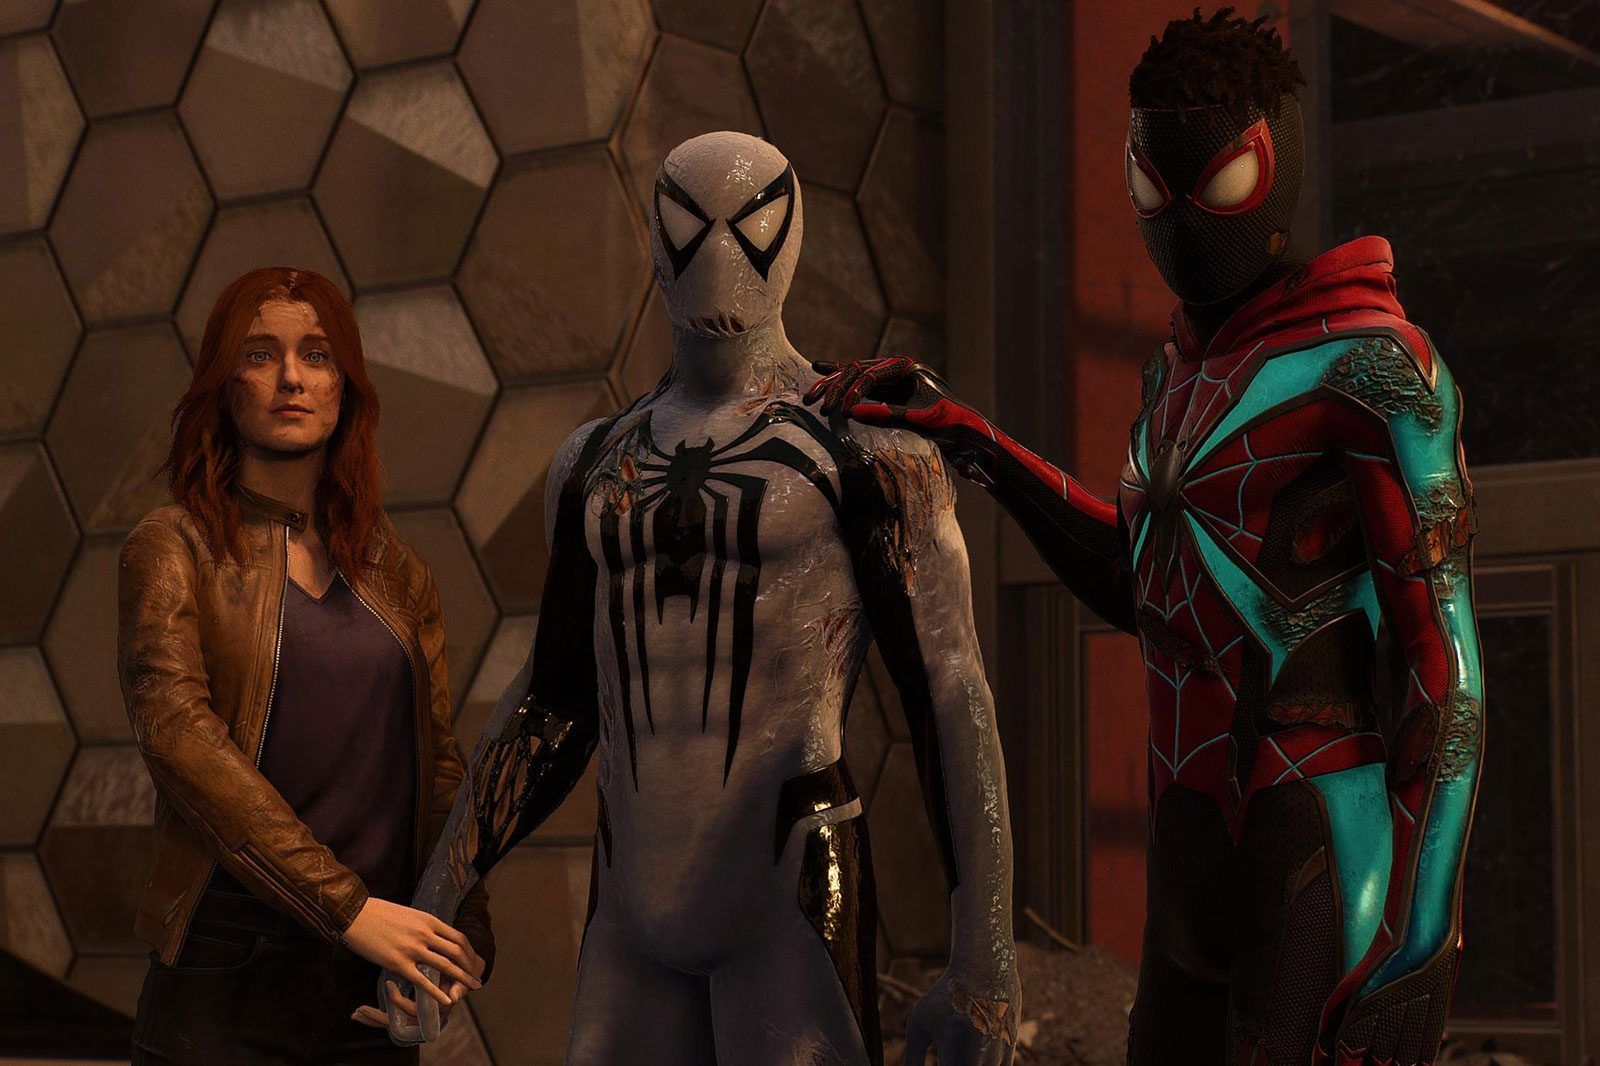 Spider-Man 2 Ending Explained: How Insomniac Sets Up the Next